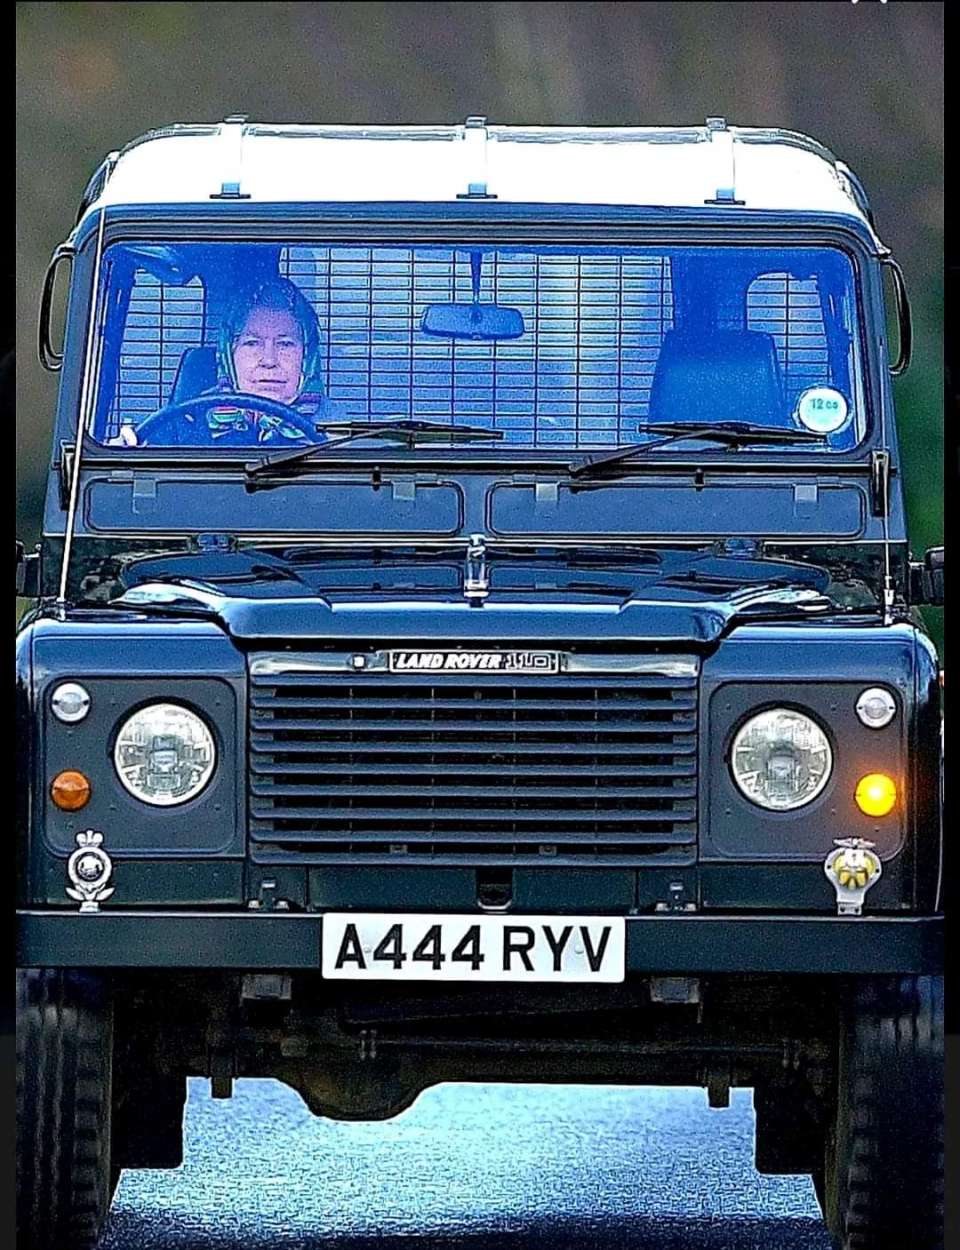 22 Years Ago<br /><br />The Queen behind the wheel of her 2000 Land Rover Defender 110 on her way to the stables at Sandringham Estate, in Norfolk, in 2000.